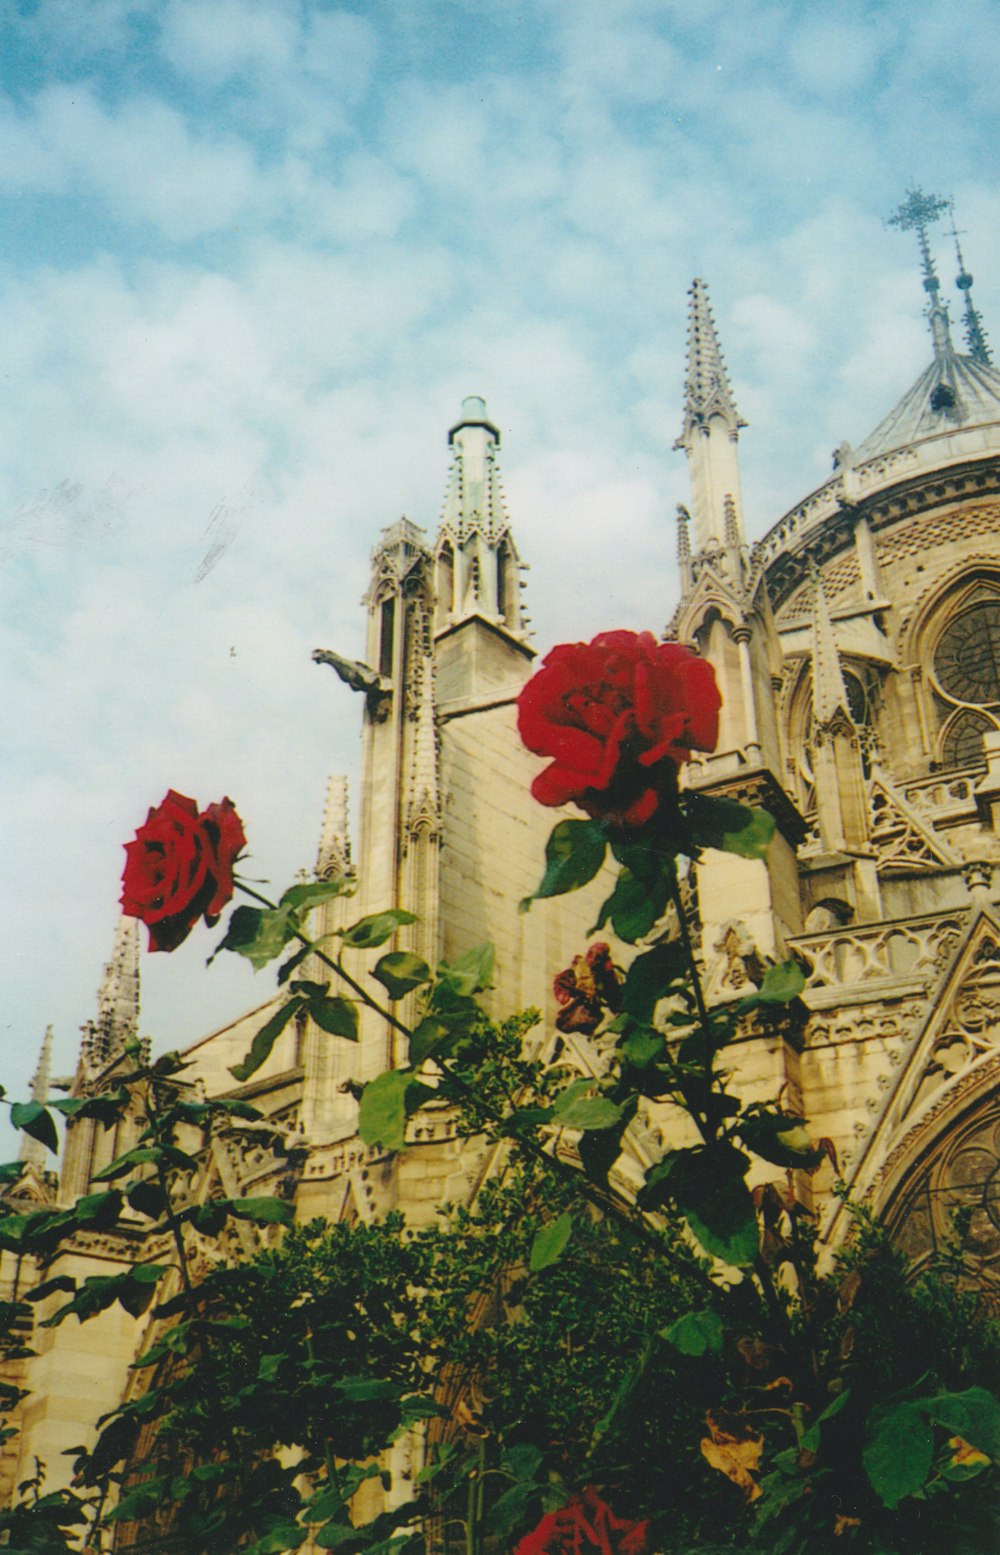 a rose bush in front of a large building